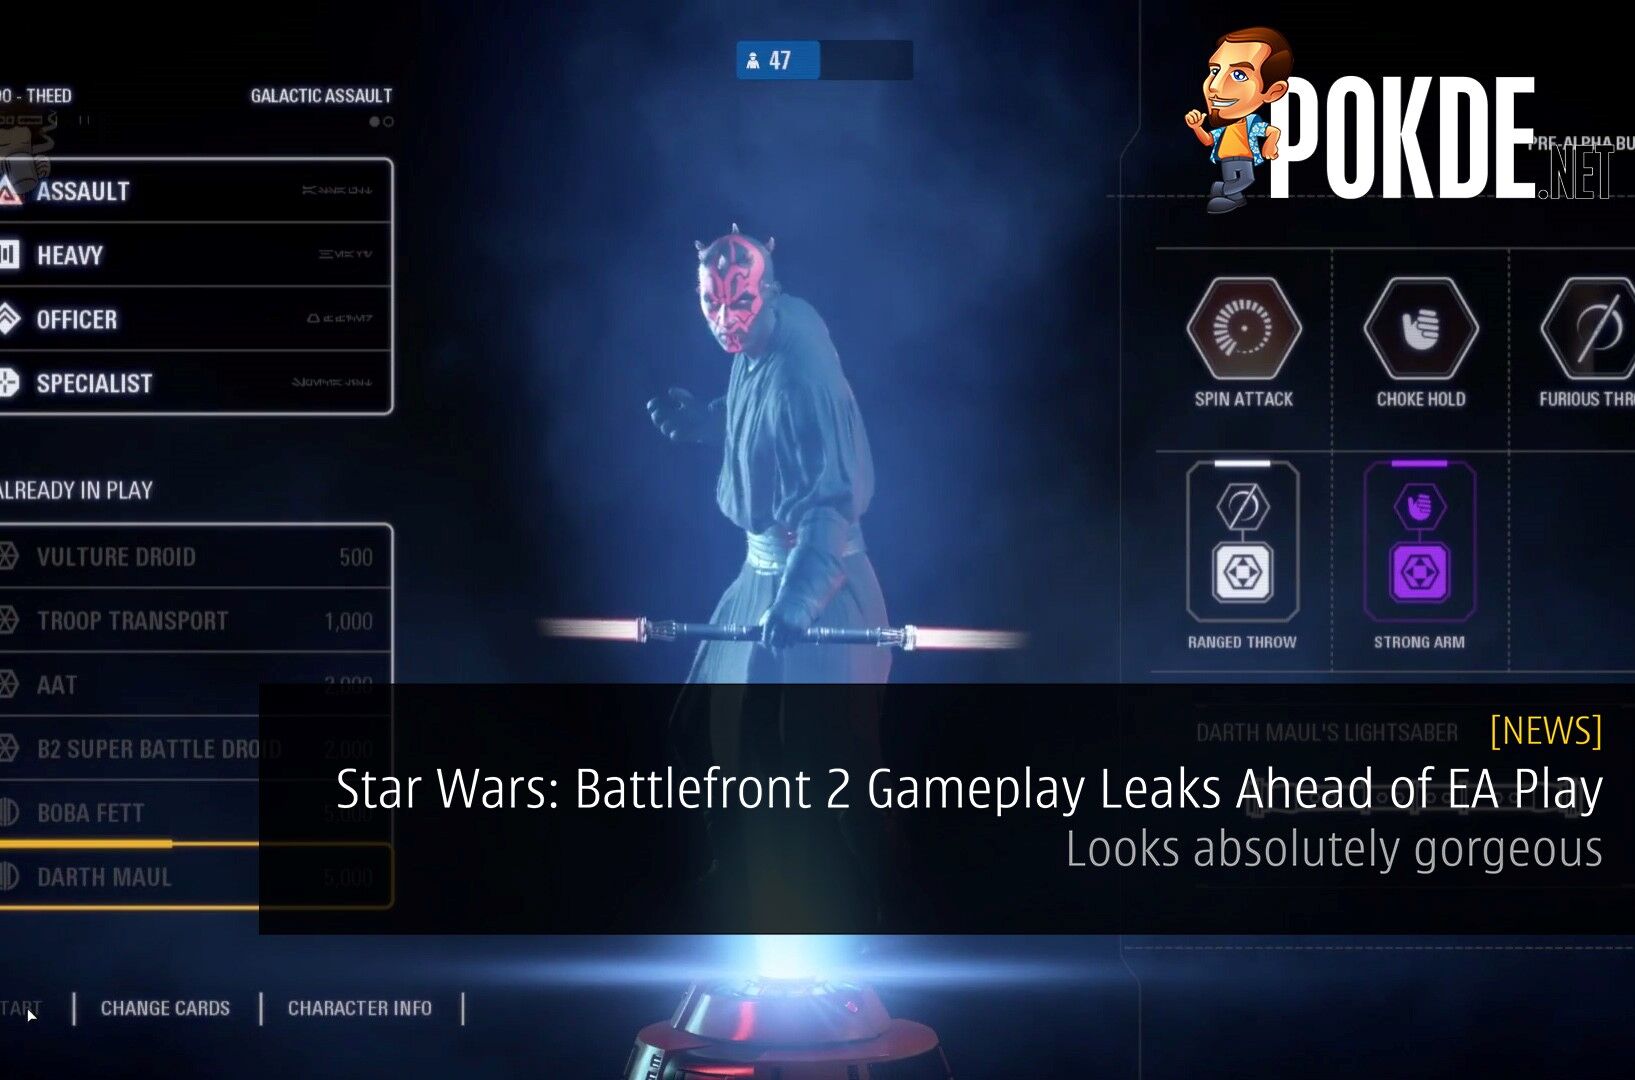 Star Wars: Battlefront 2 Gameplay Leaks Ahead of EA Play - Looks absolutely gorgeous 38